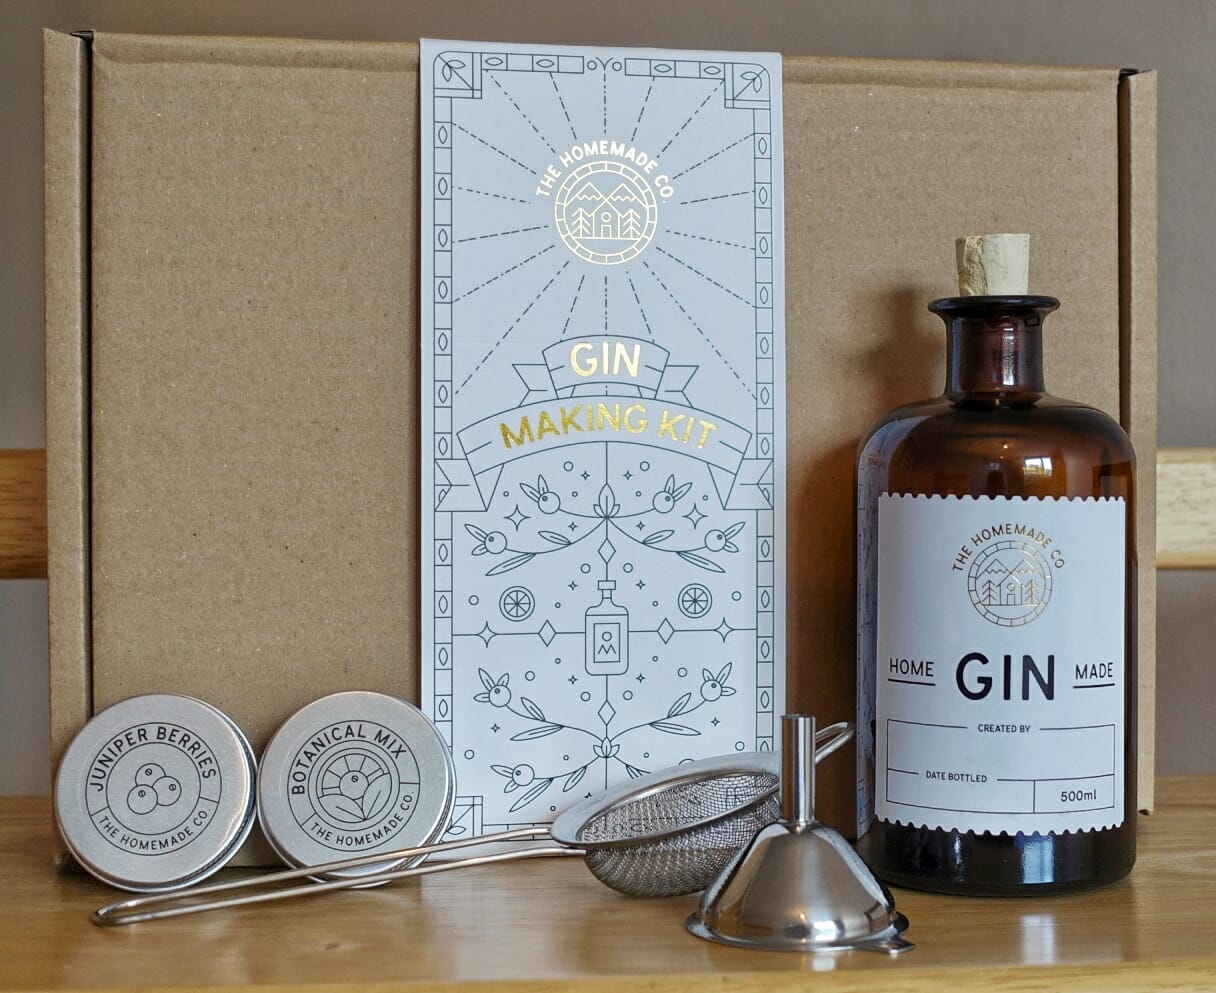 bar@drinkstuff Home Gin Making Kit Gift Boxed Gin Makers Kit with Juniper Berries to Make Your Own Gin